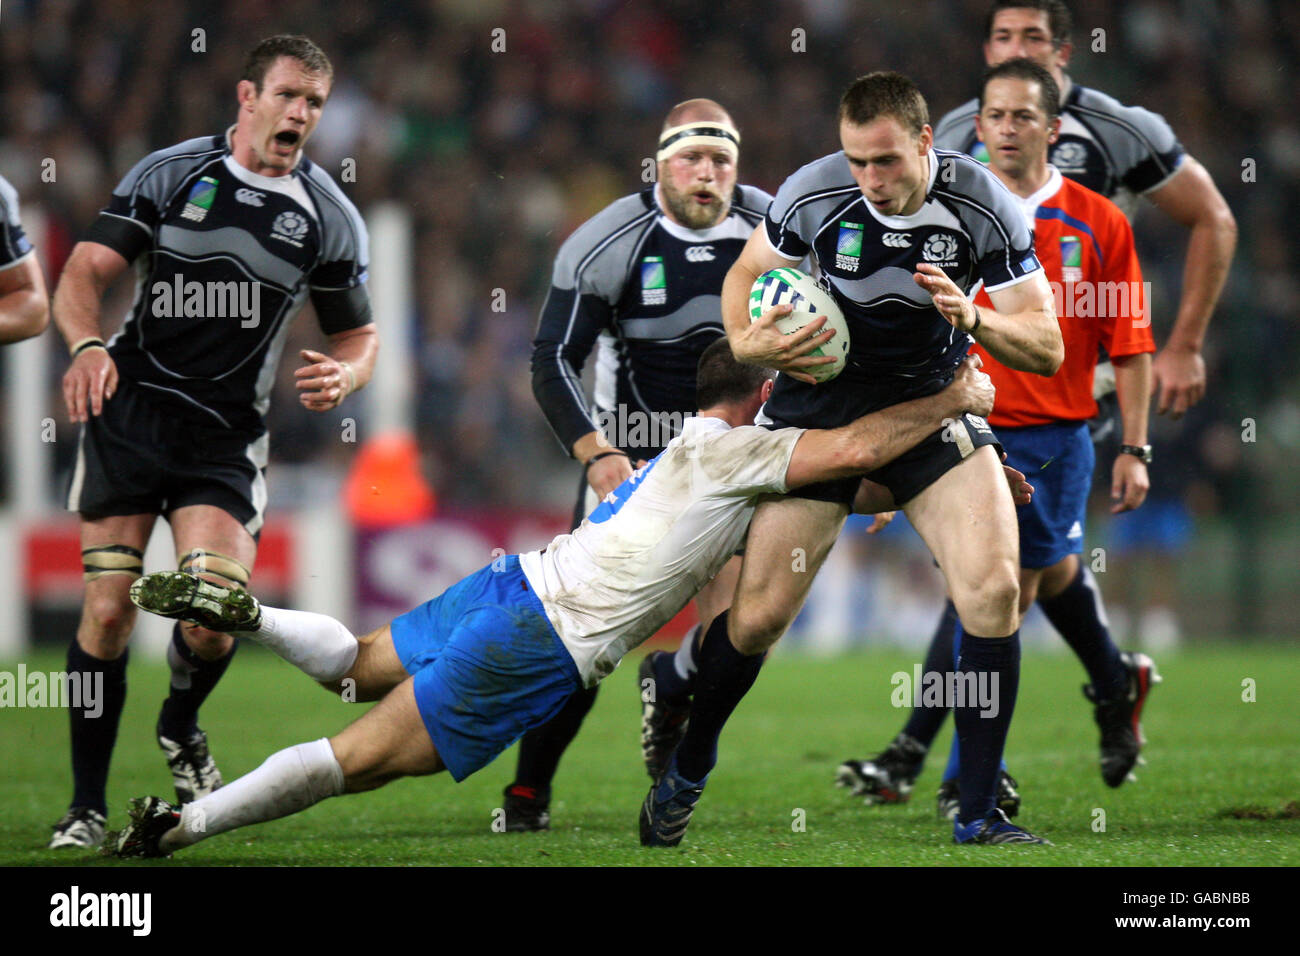 Scotland's Andrew Henderson is tackled by Italy's Alessandro Troncon during the IRB Rugby World Cup Pool C match at Stade Geoffroy-Guichard, St Etienne, France. Stock Photo